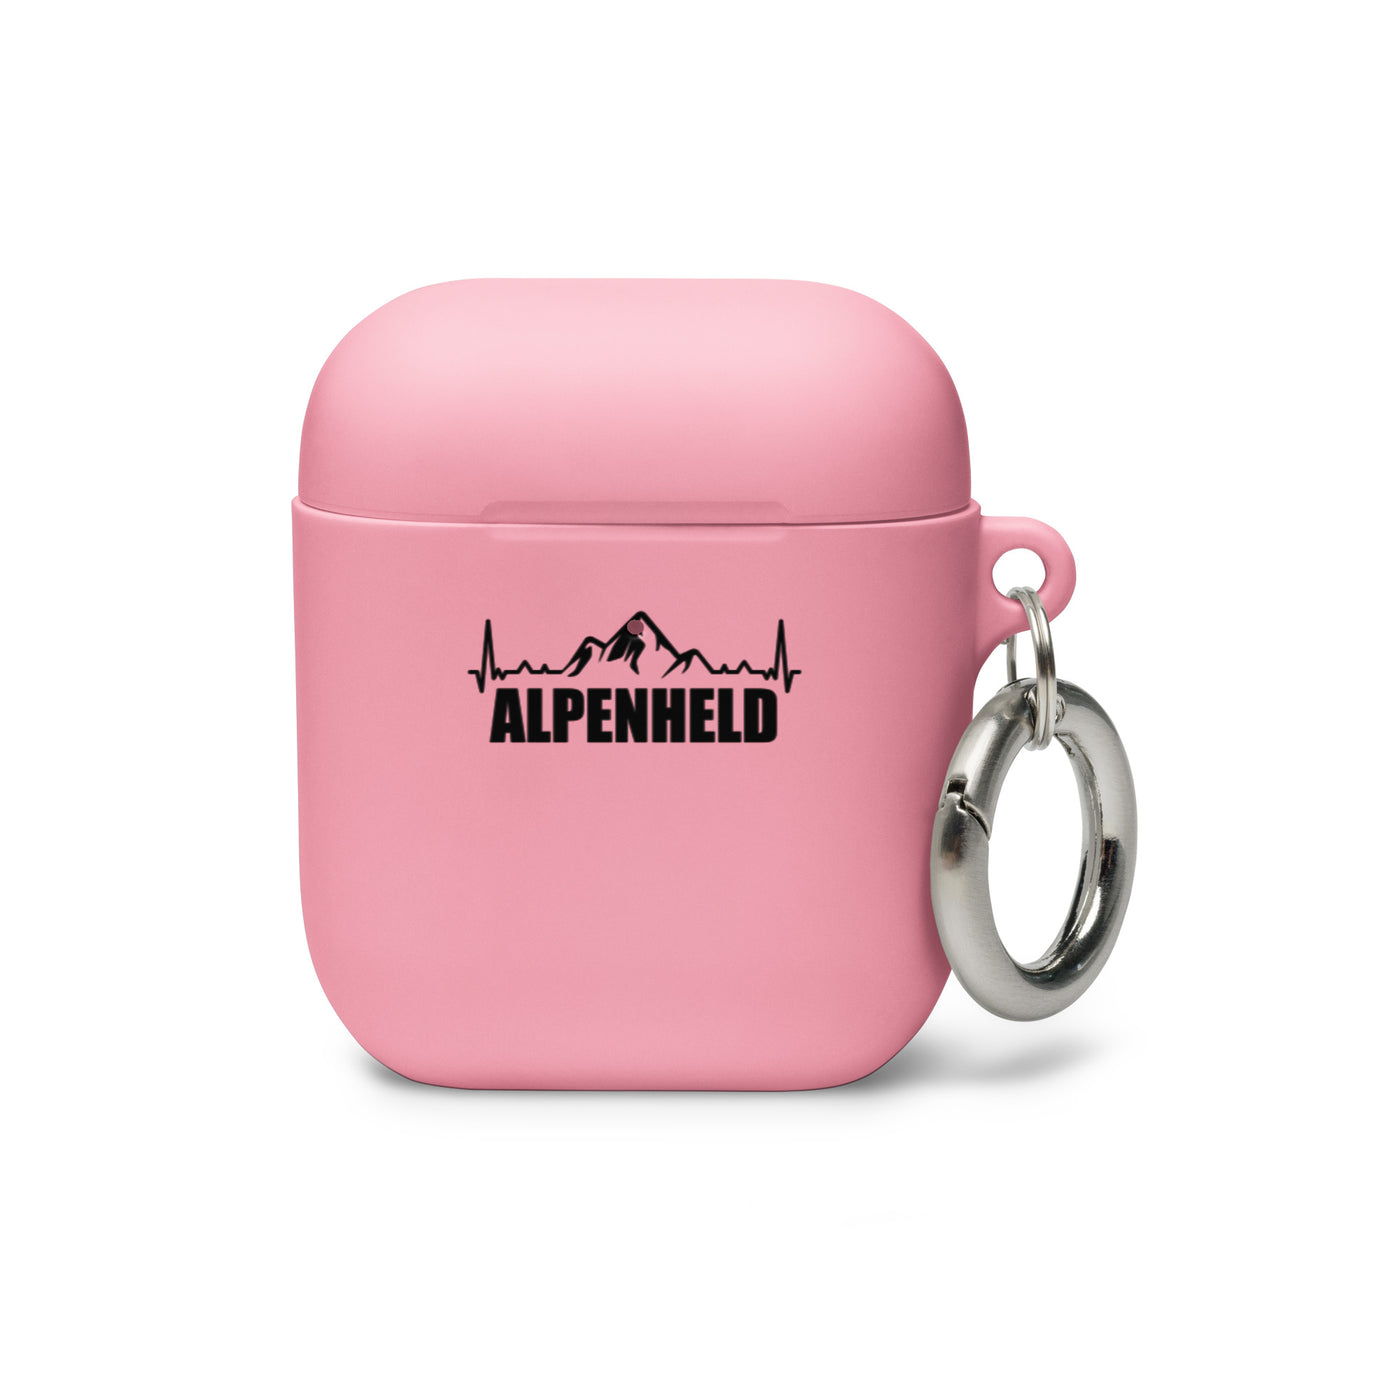 Alpenheld 1 - AirPods Case berge Pink AirPods